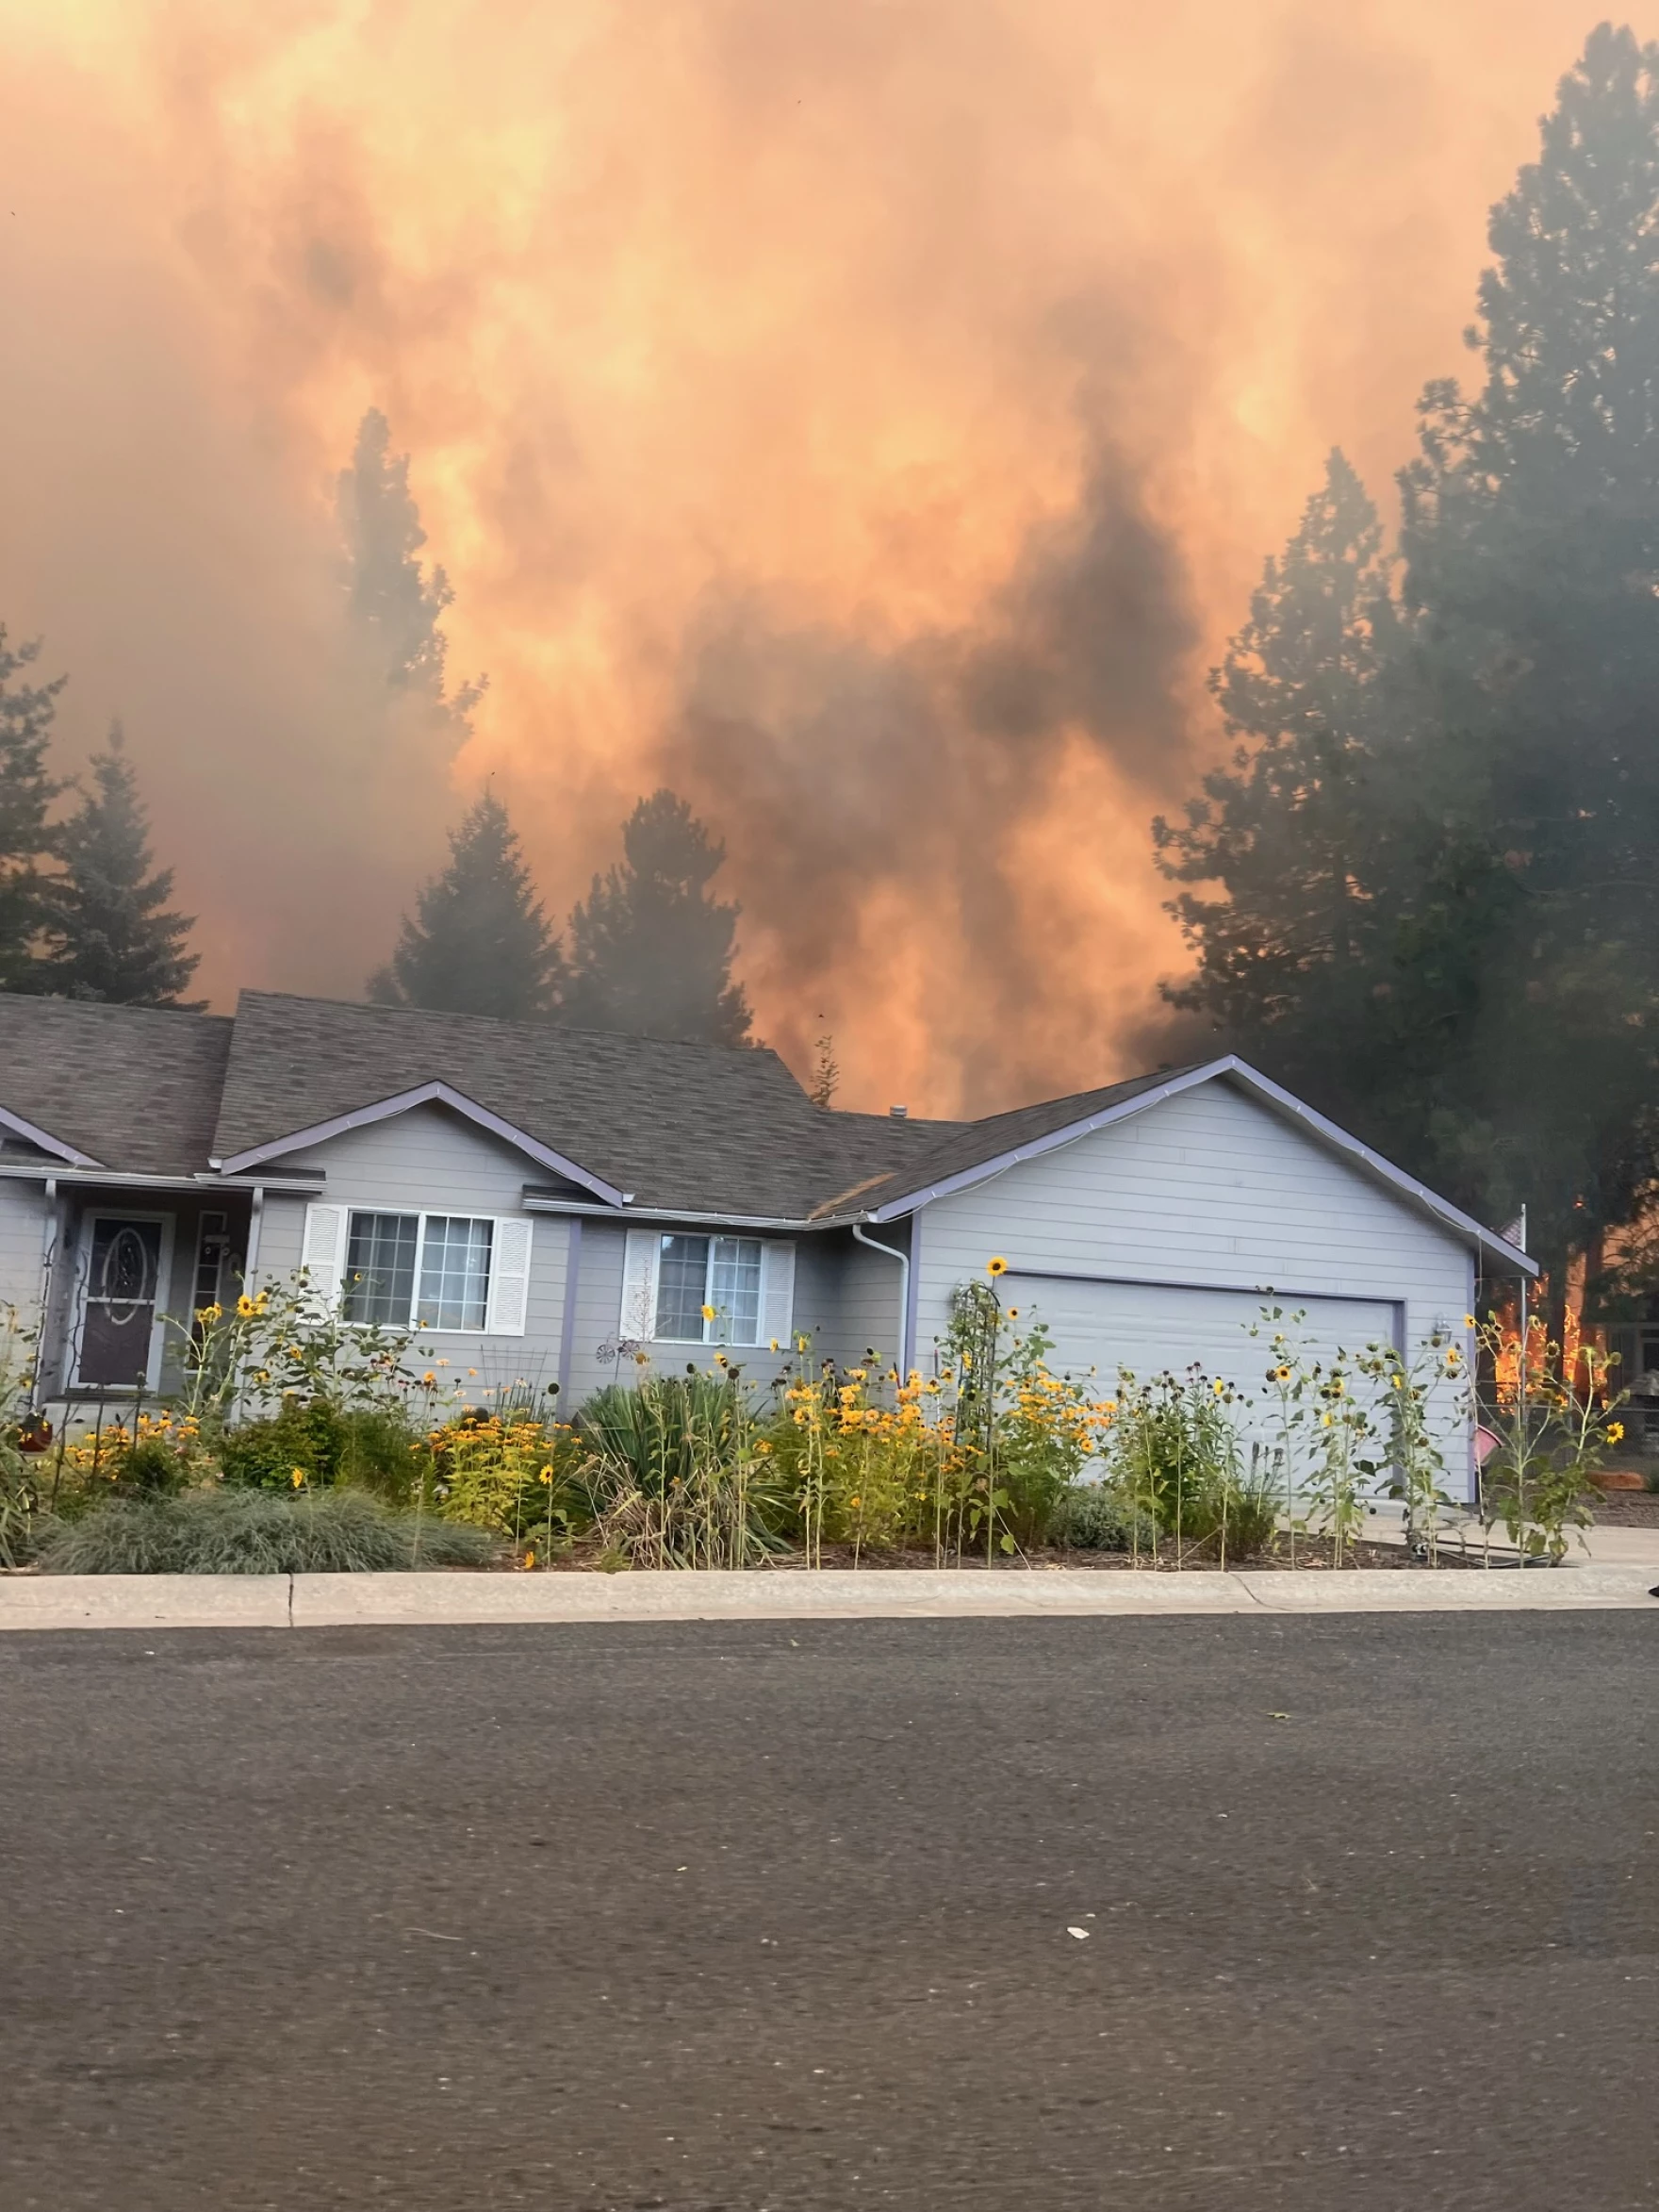 Sadie Rison, of Medical Lake, snapped this photo of her home and the Gray Fire on her way out of her neighborhood. Her home later burned down